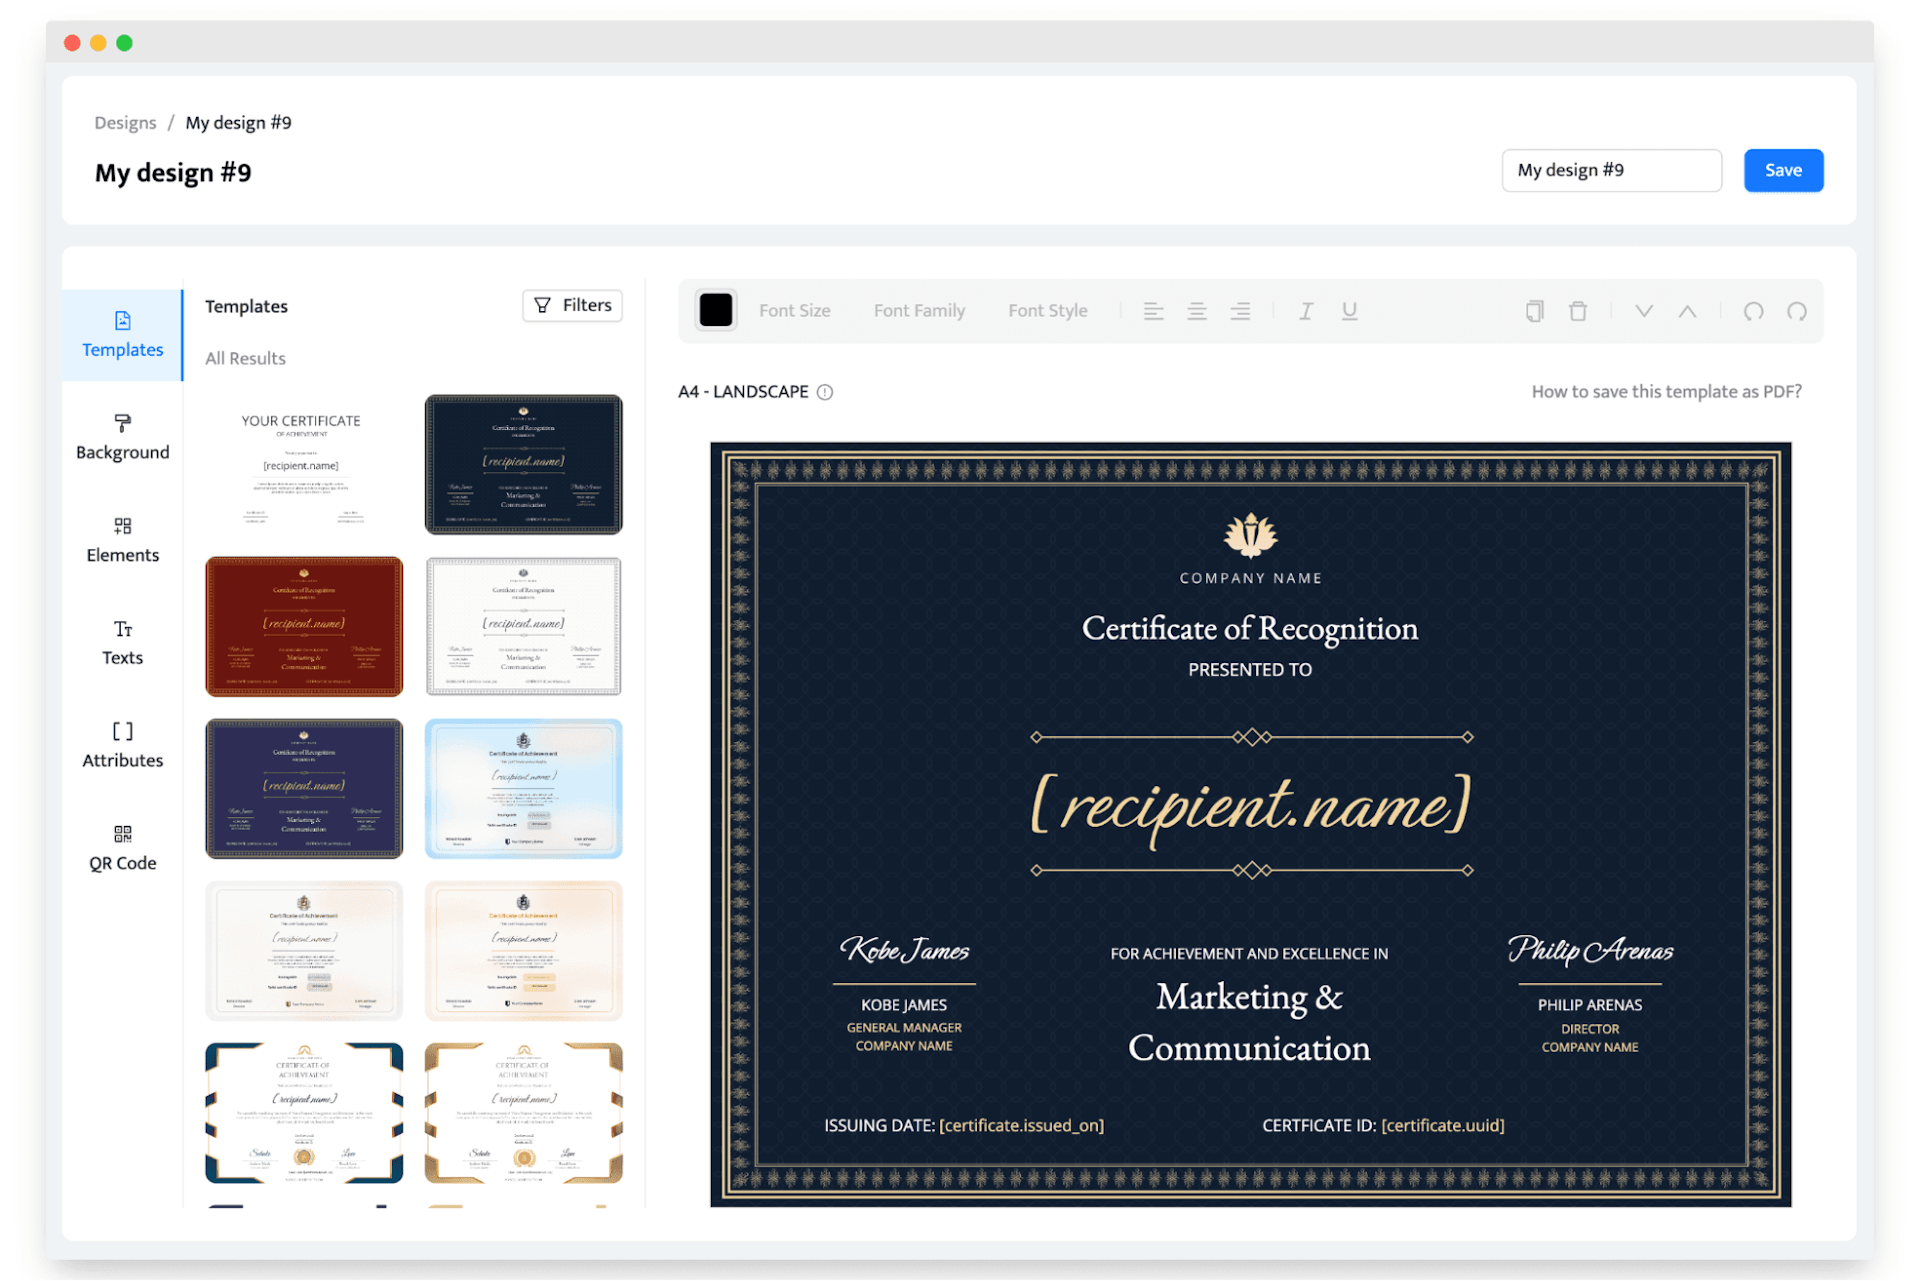 Built-in editor to create verified certificates to CPD courses.